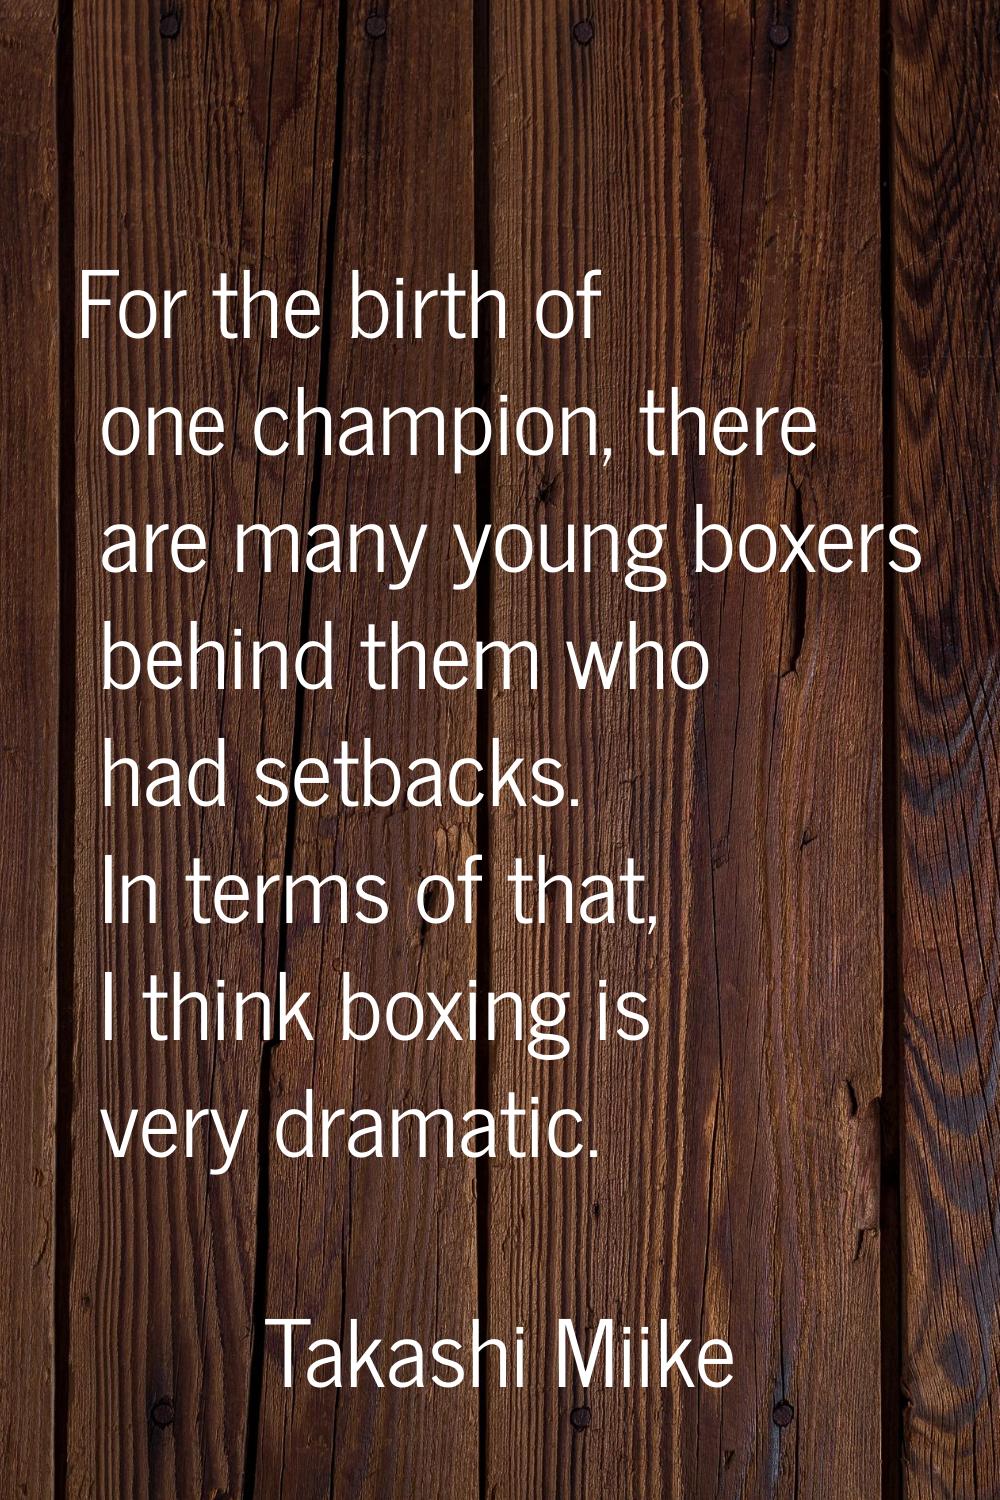 For the birth of one champion, there are many young boxers behind them who had setbacks. In terms o